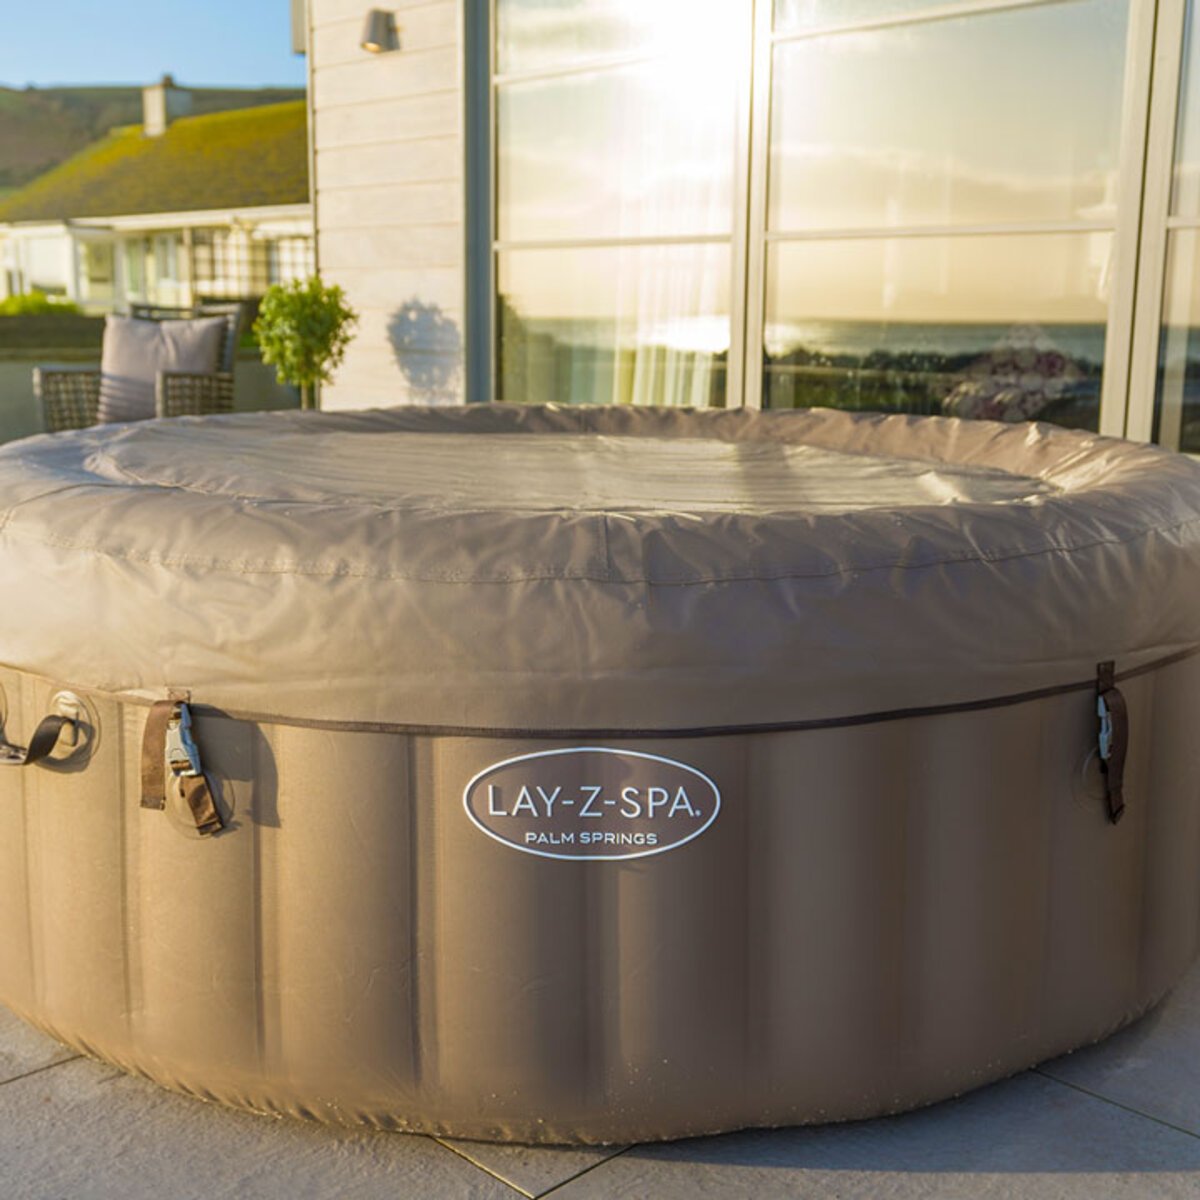 Lay-Z-Spa Palm Springs Inflatable 6 Person Spa - Delivered